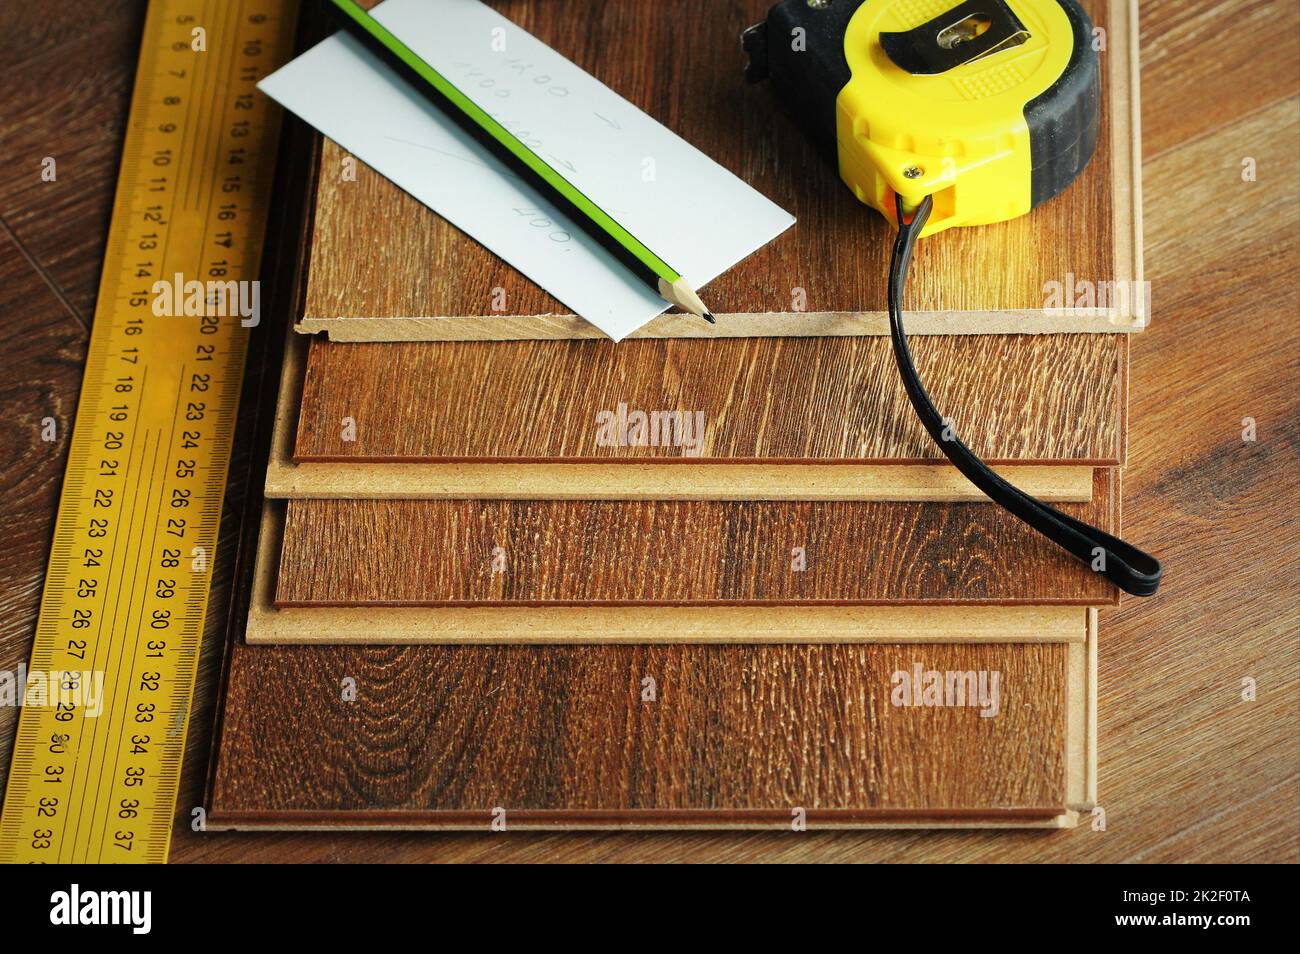 Laminate floor planks and tools on wooden background Stock Photo